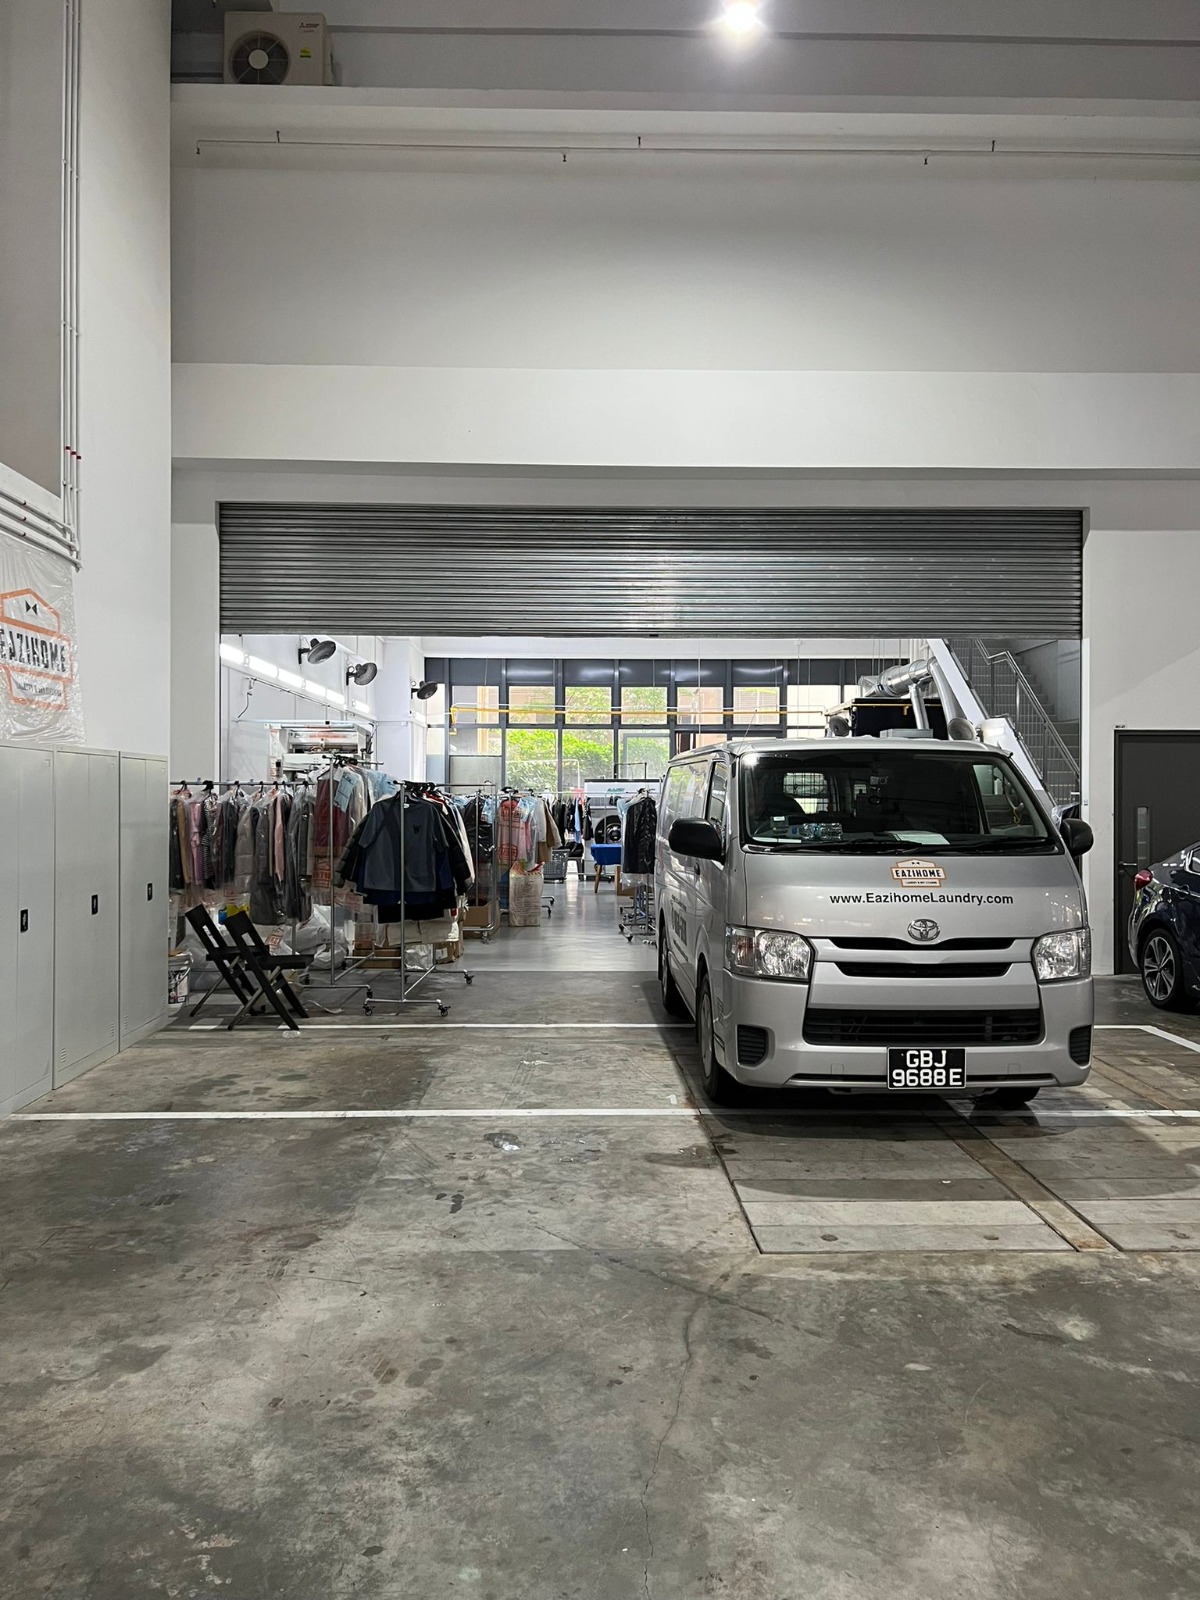 Eazihome Laundry & Dry Cleaning Jurong East